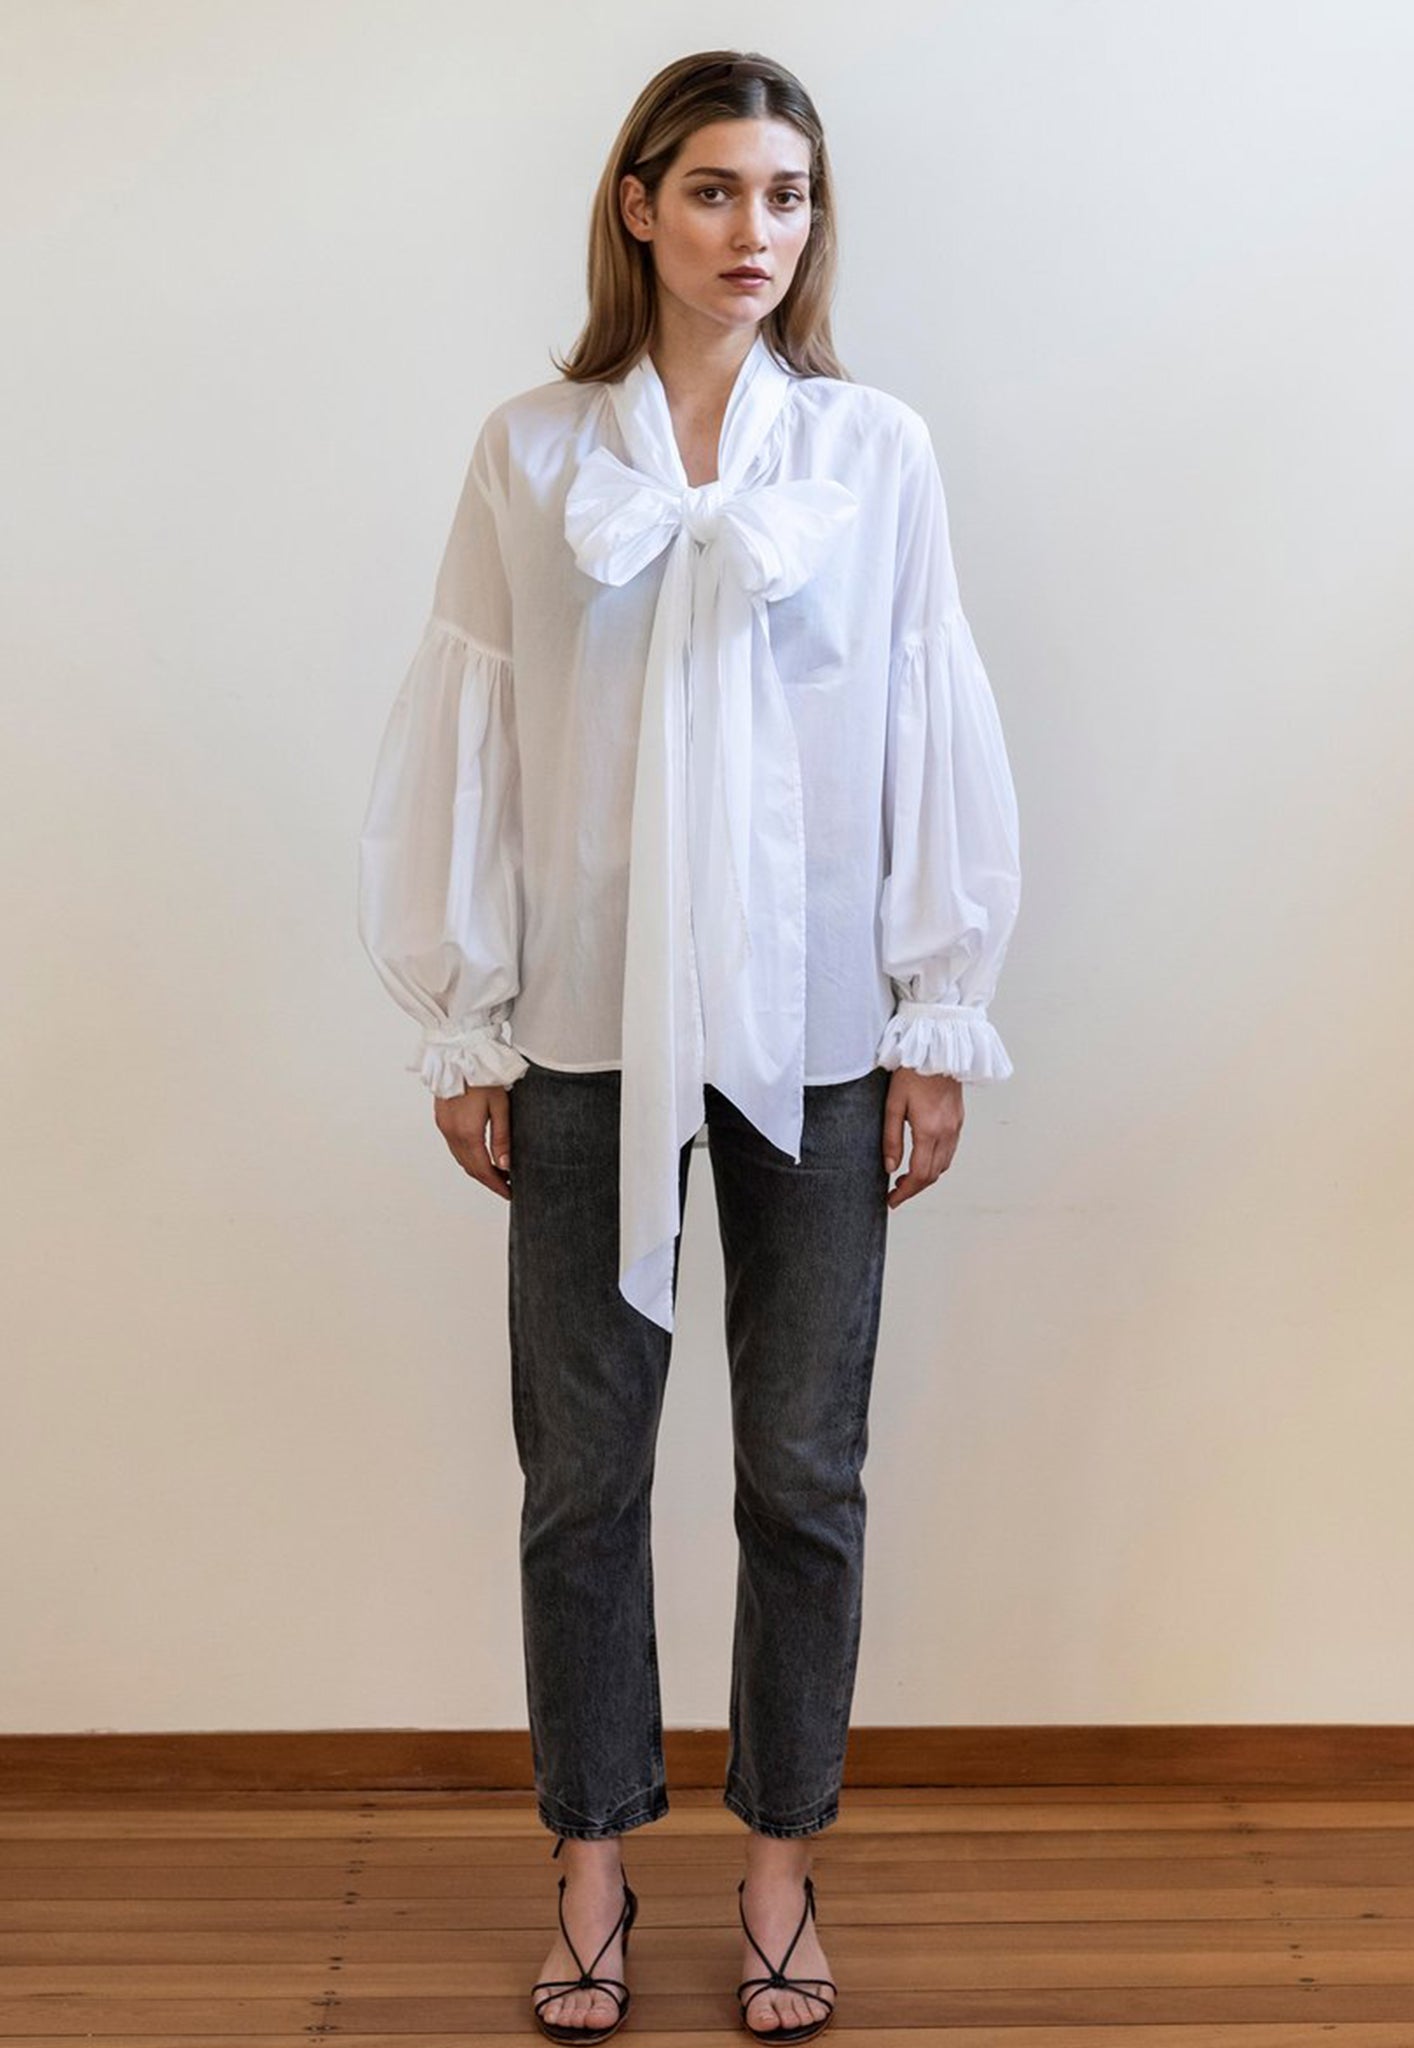 Bow Blouse - White Cotton Voile sold by Angel Divine